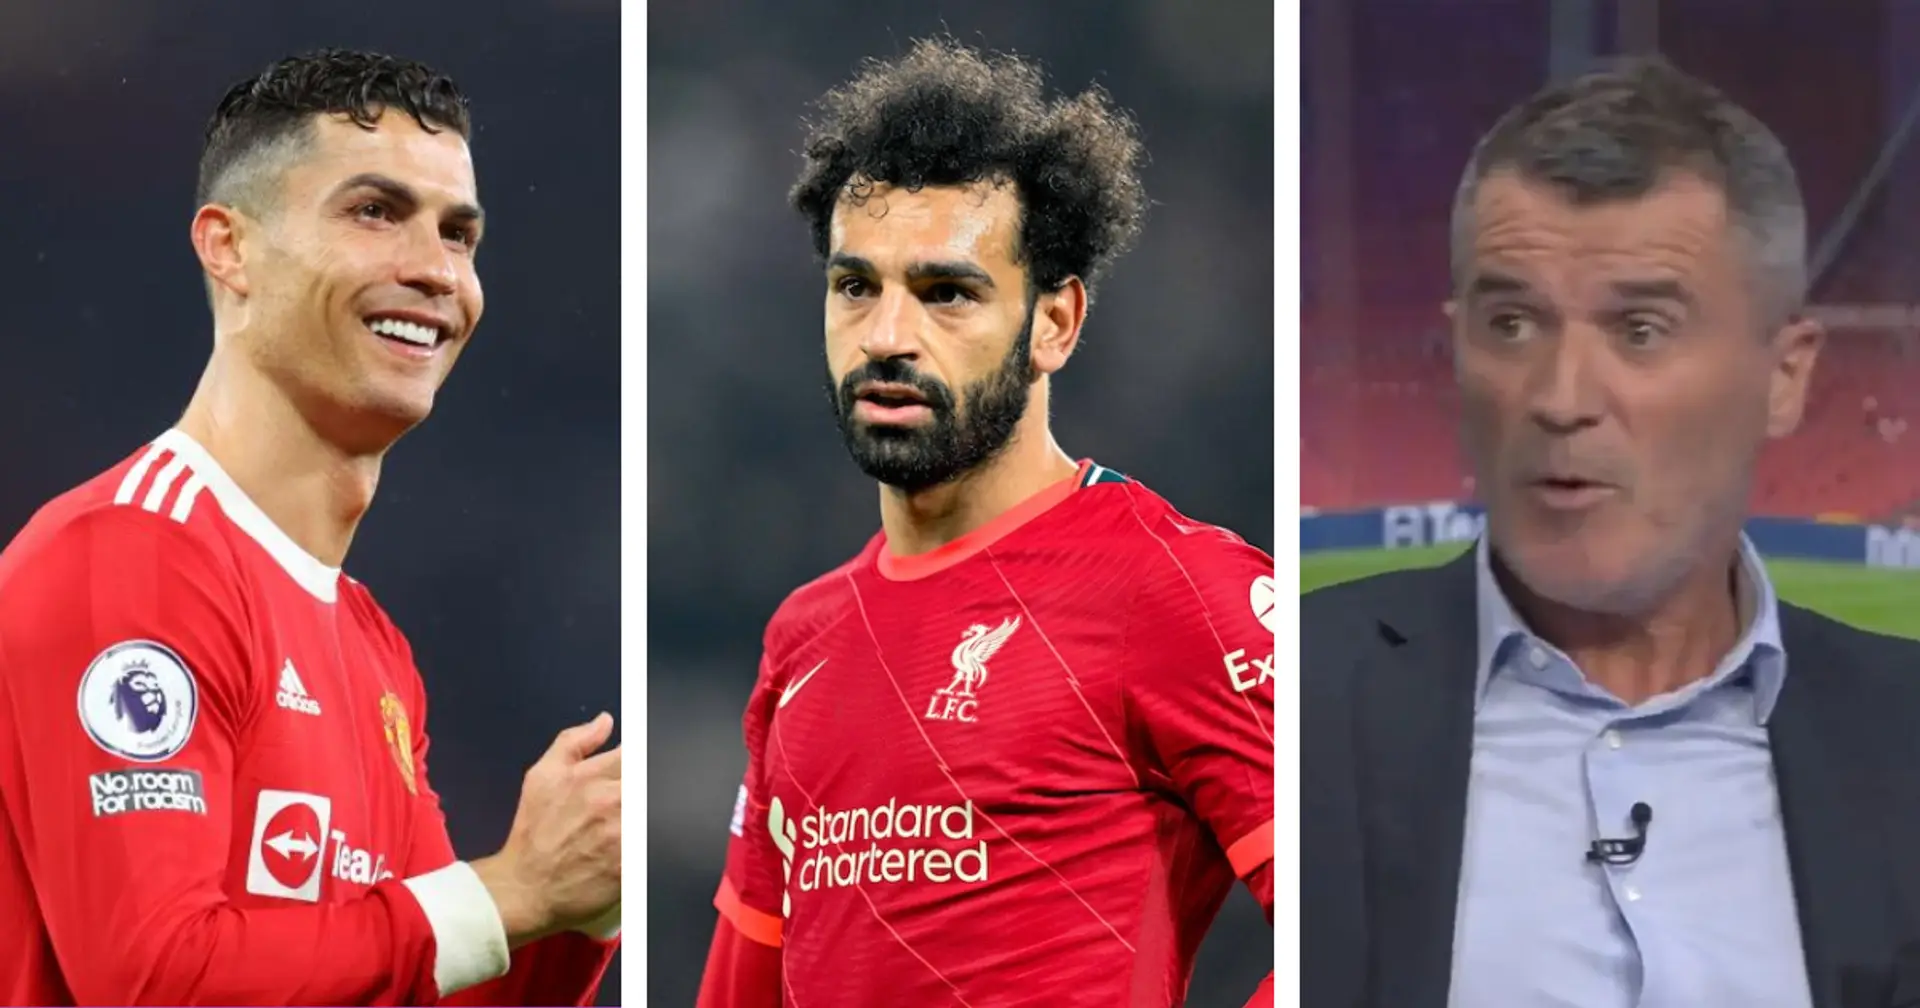 Roy Keane: 'Put Ronaldo in that Liverpool side and he'll get you more goals than Salah'